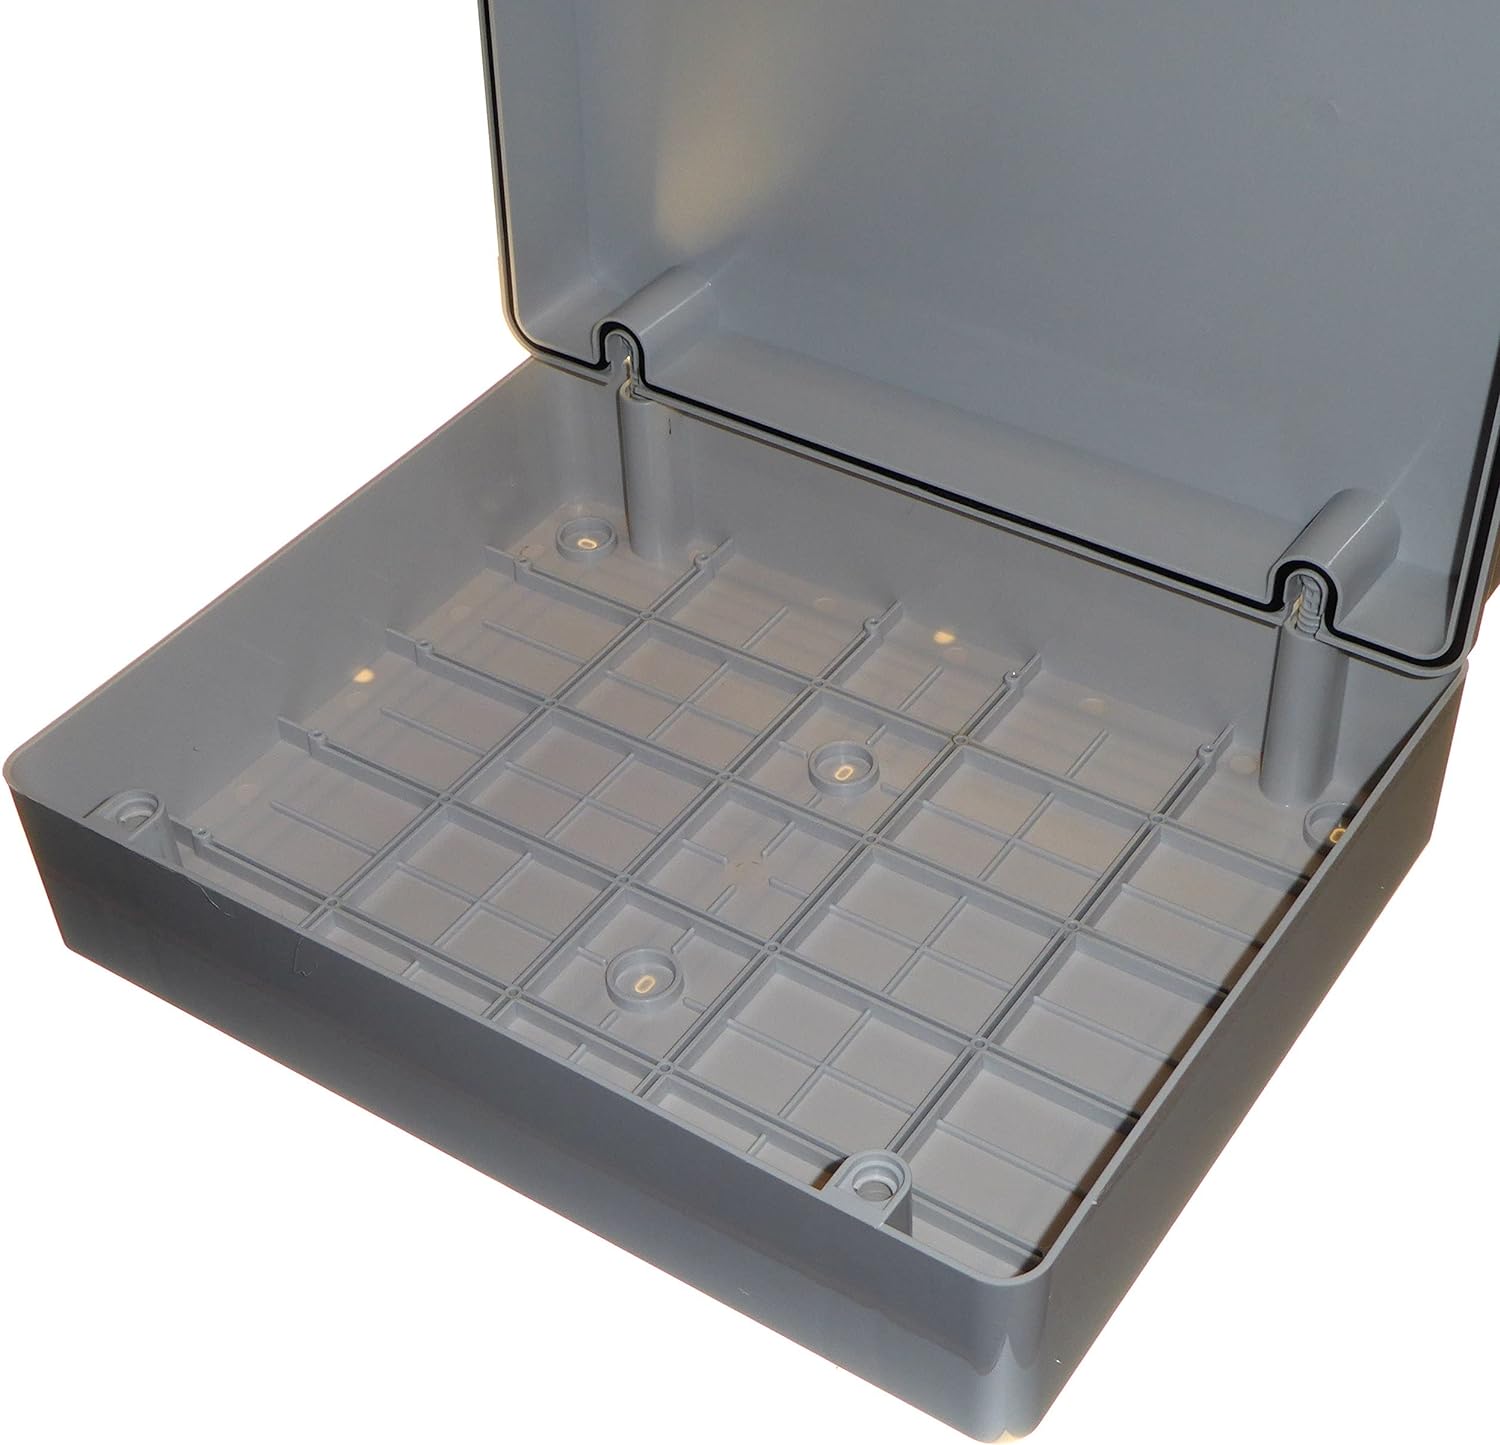 ESR B460 460mm x 380mm x 120mm Extra Large Junction Box Plastic PVC IP56 Weatherproof Waterproof Electrical Enclosure with Plain Sides & Hinge Indoor Outdoor